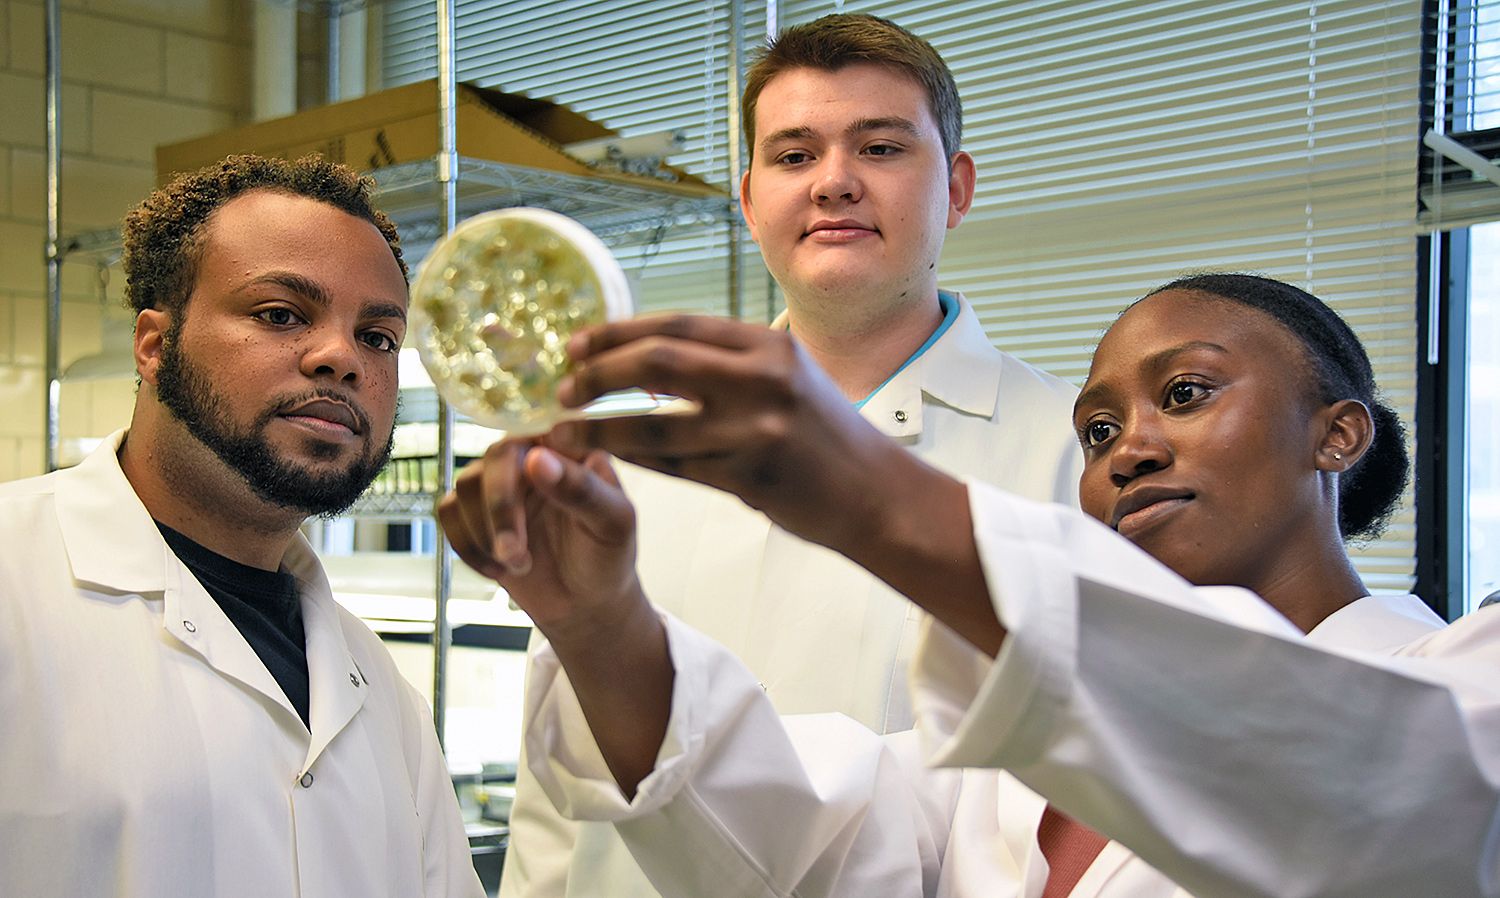 Fort Valley State University plant science-biotechnology majors Bacari Harris, Jordan Reid and Breonna Caldwell (pictured from left) put their skills to work examining a plant culture in a petri dish.